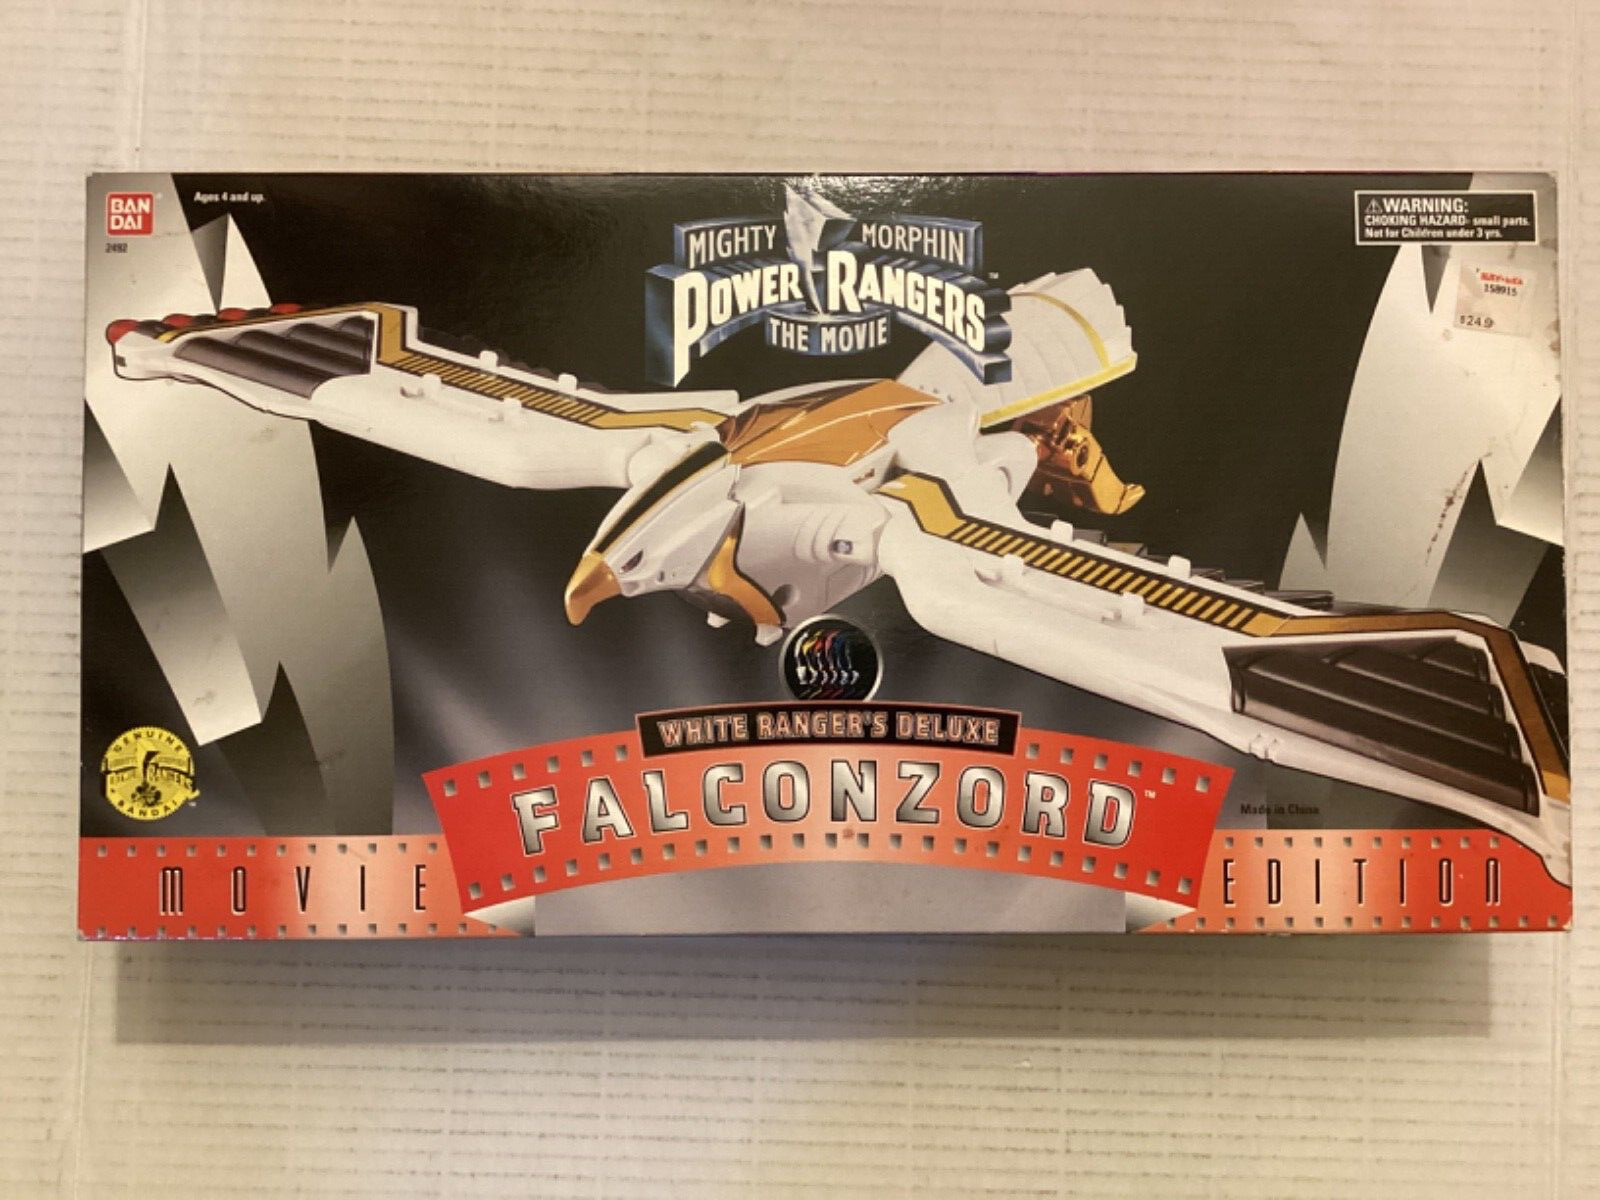 1995 Power Rangers Deluxe Falconzord Movie Edition